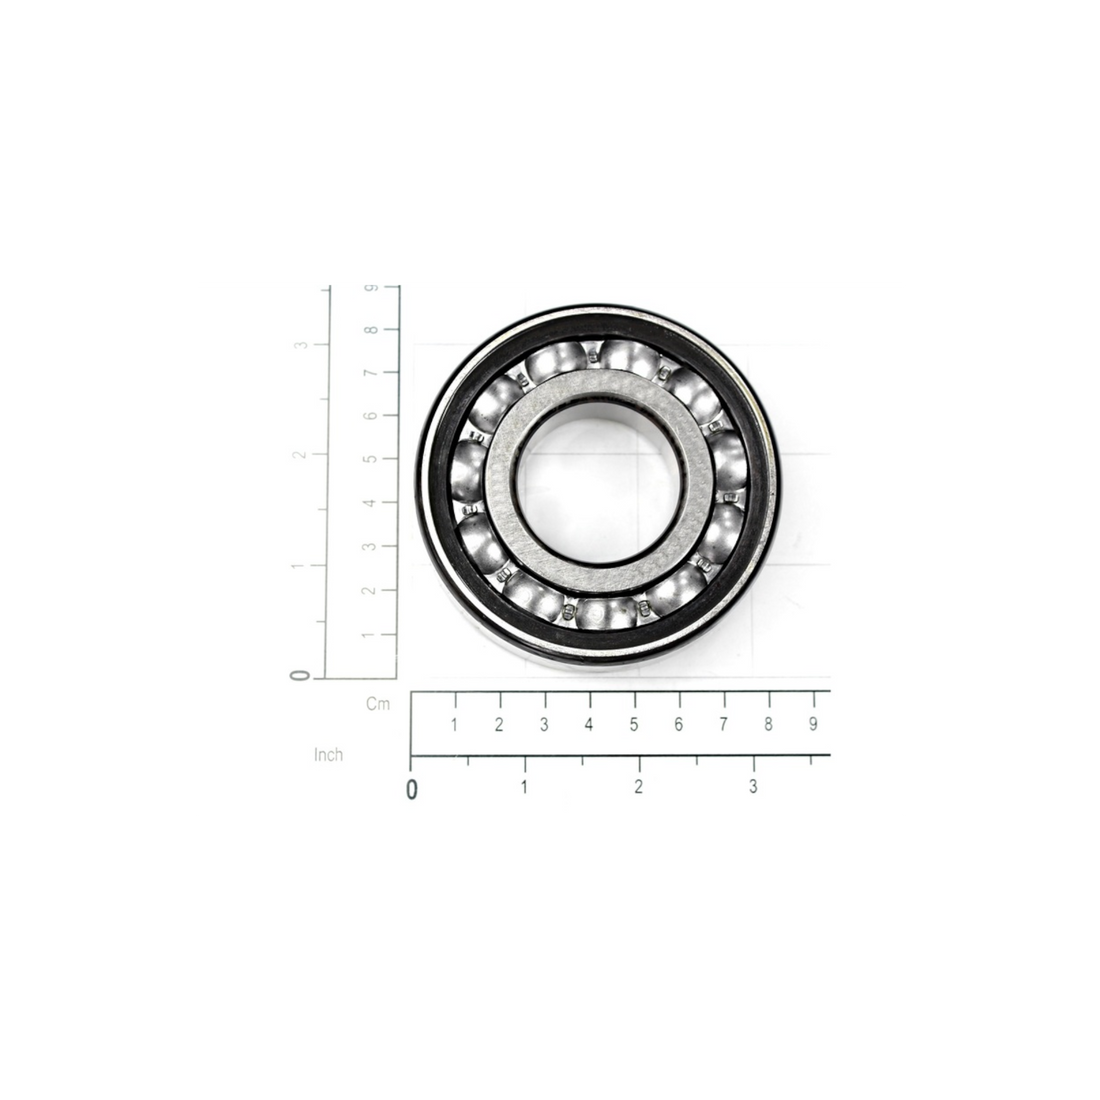 R&M Parts - Bearing, Part Number: 6300613070